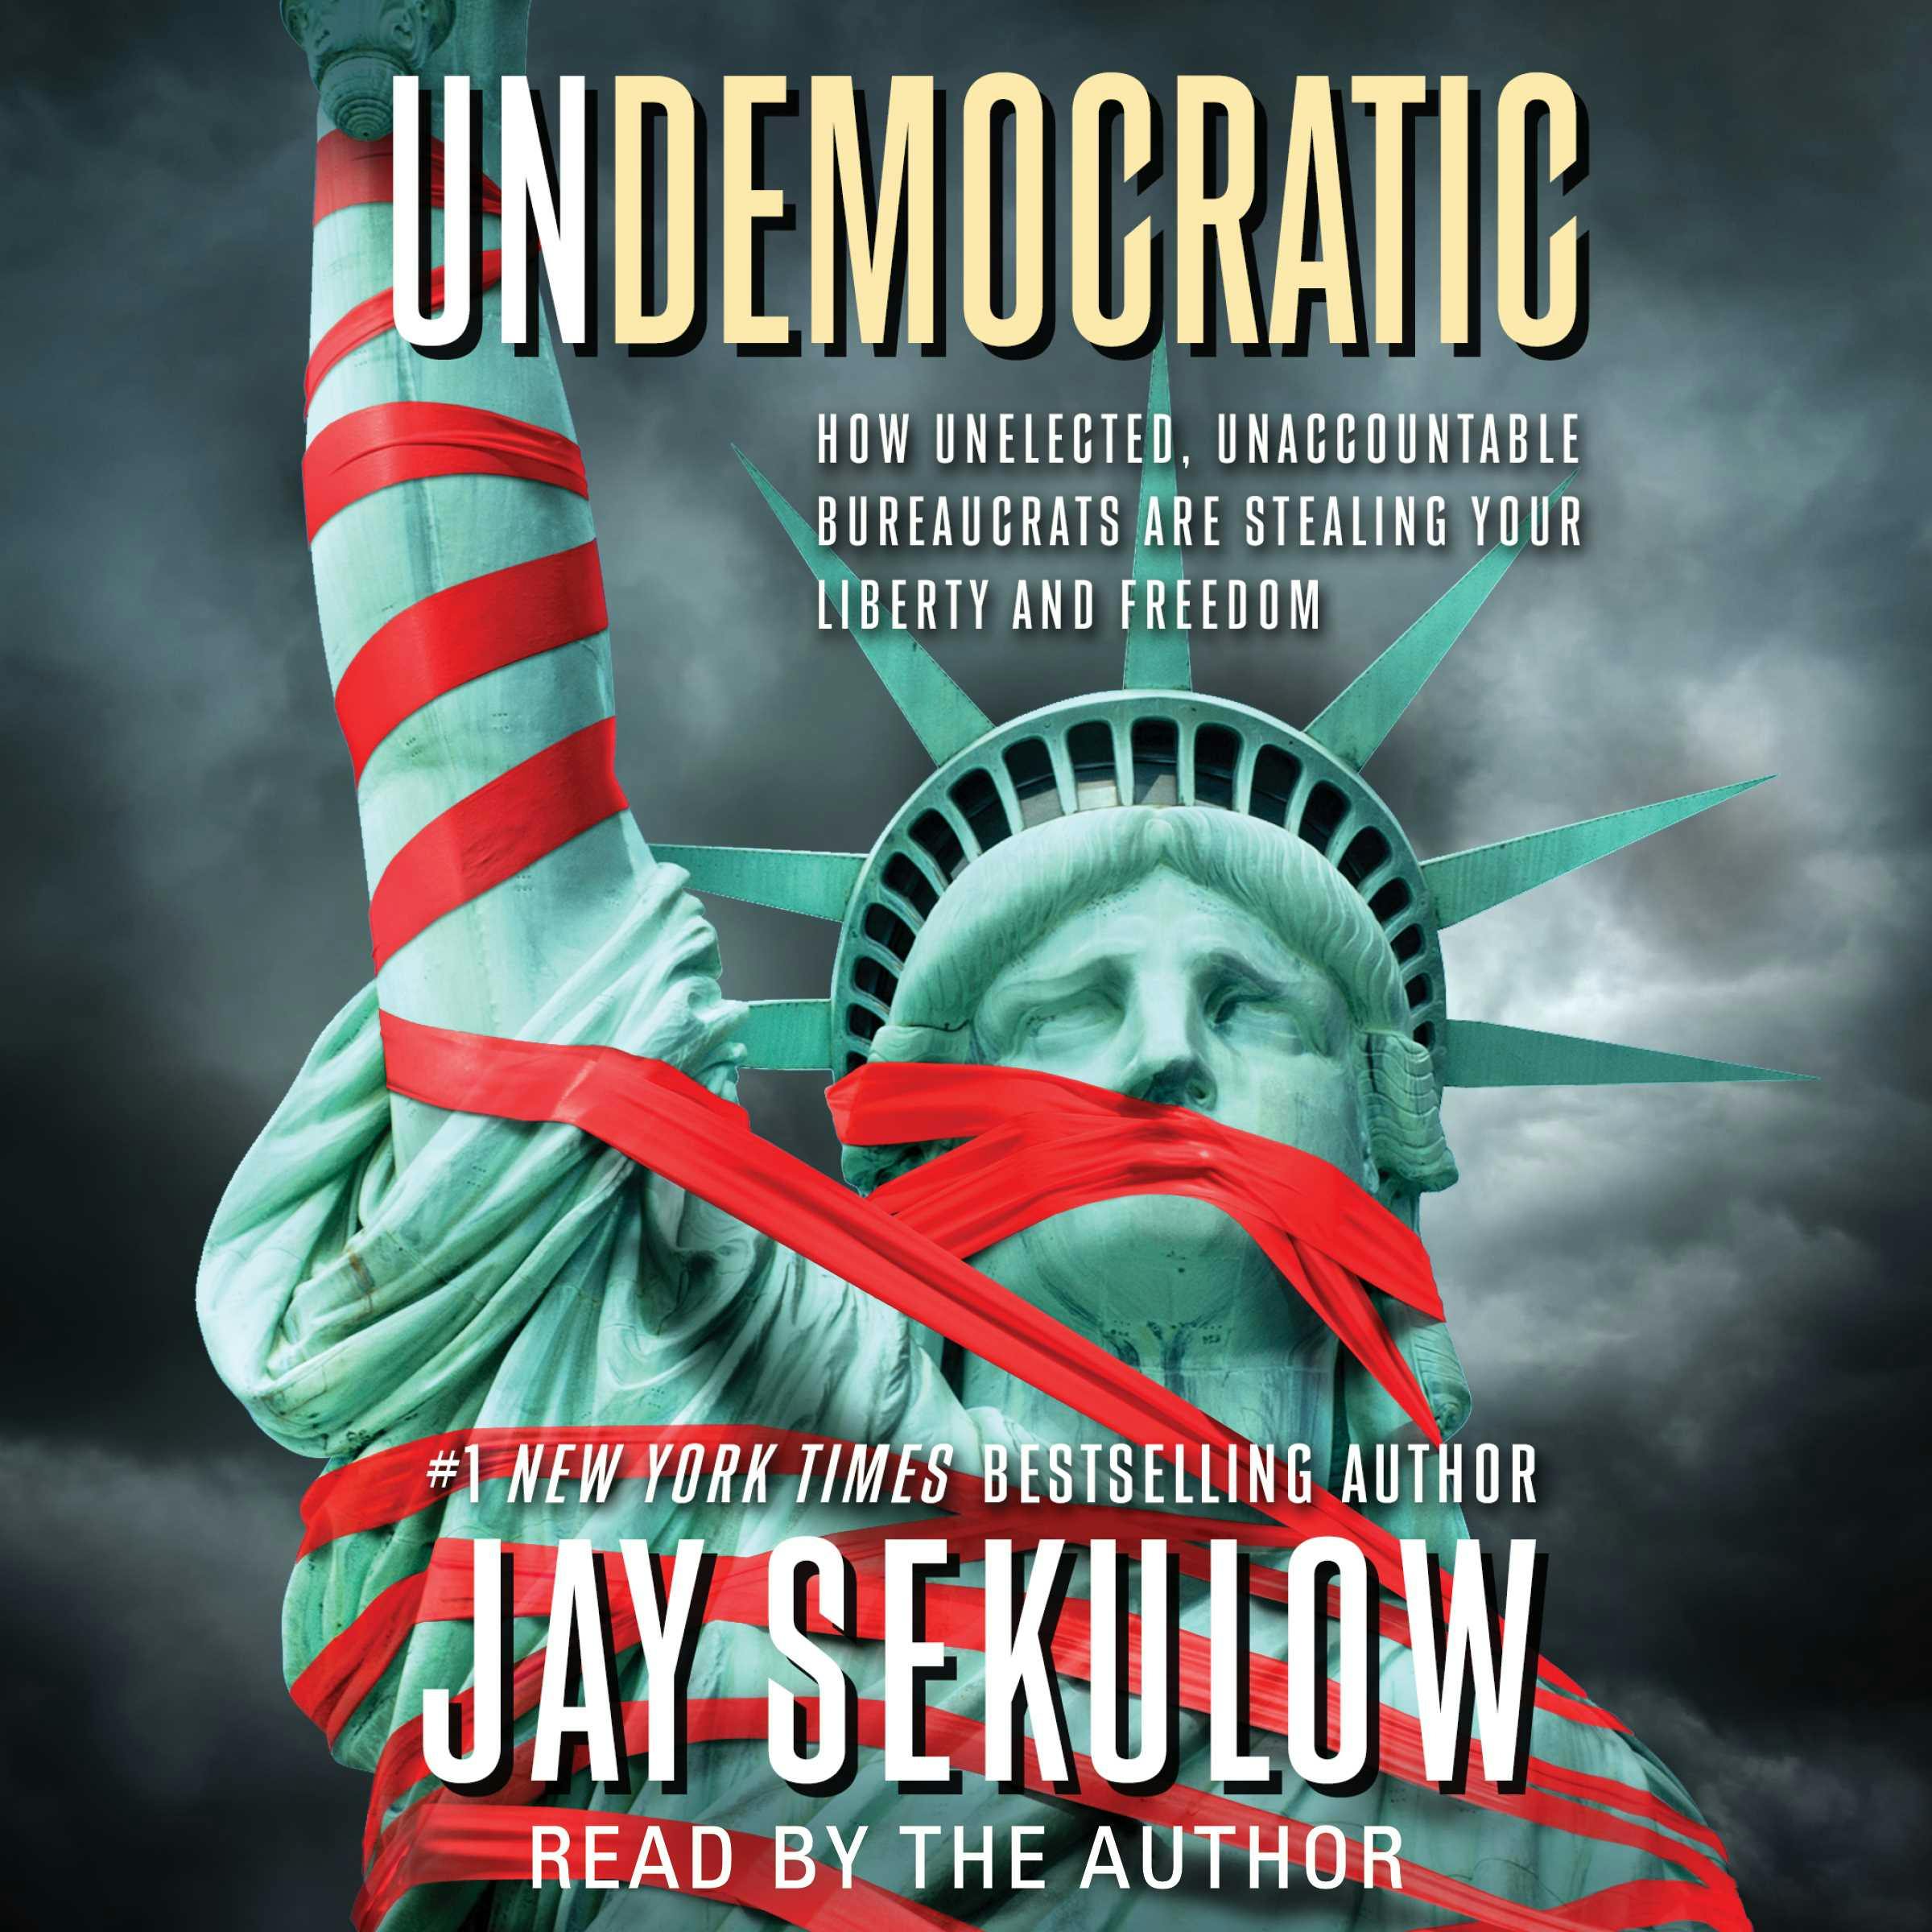 Undemocratic: How Unelected, Unaccountable Bureaucrats Are Stealing Your Liberty and Freedom - Jay Sekulow